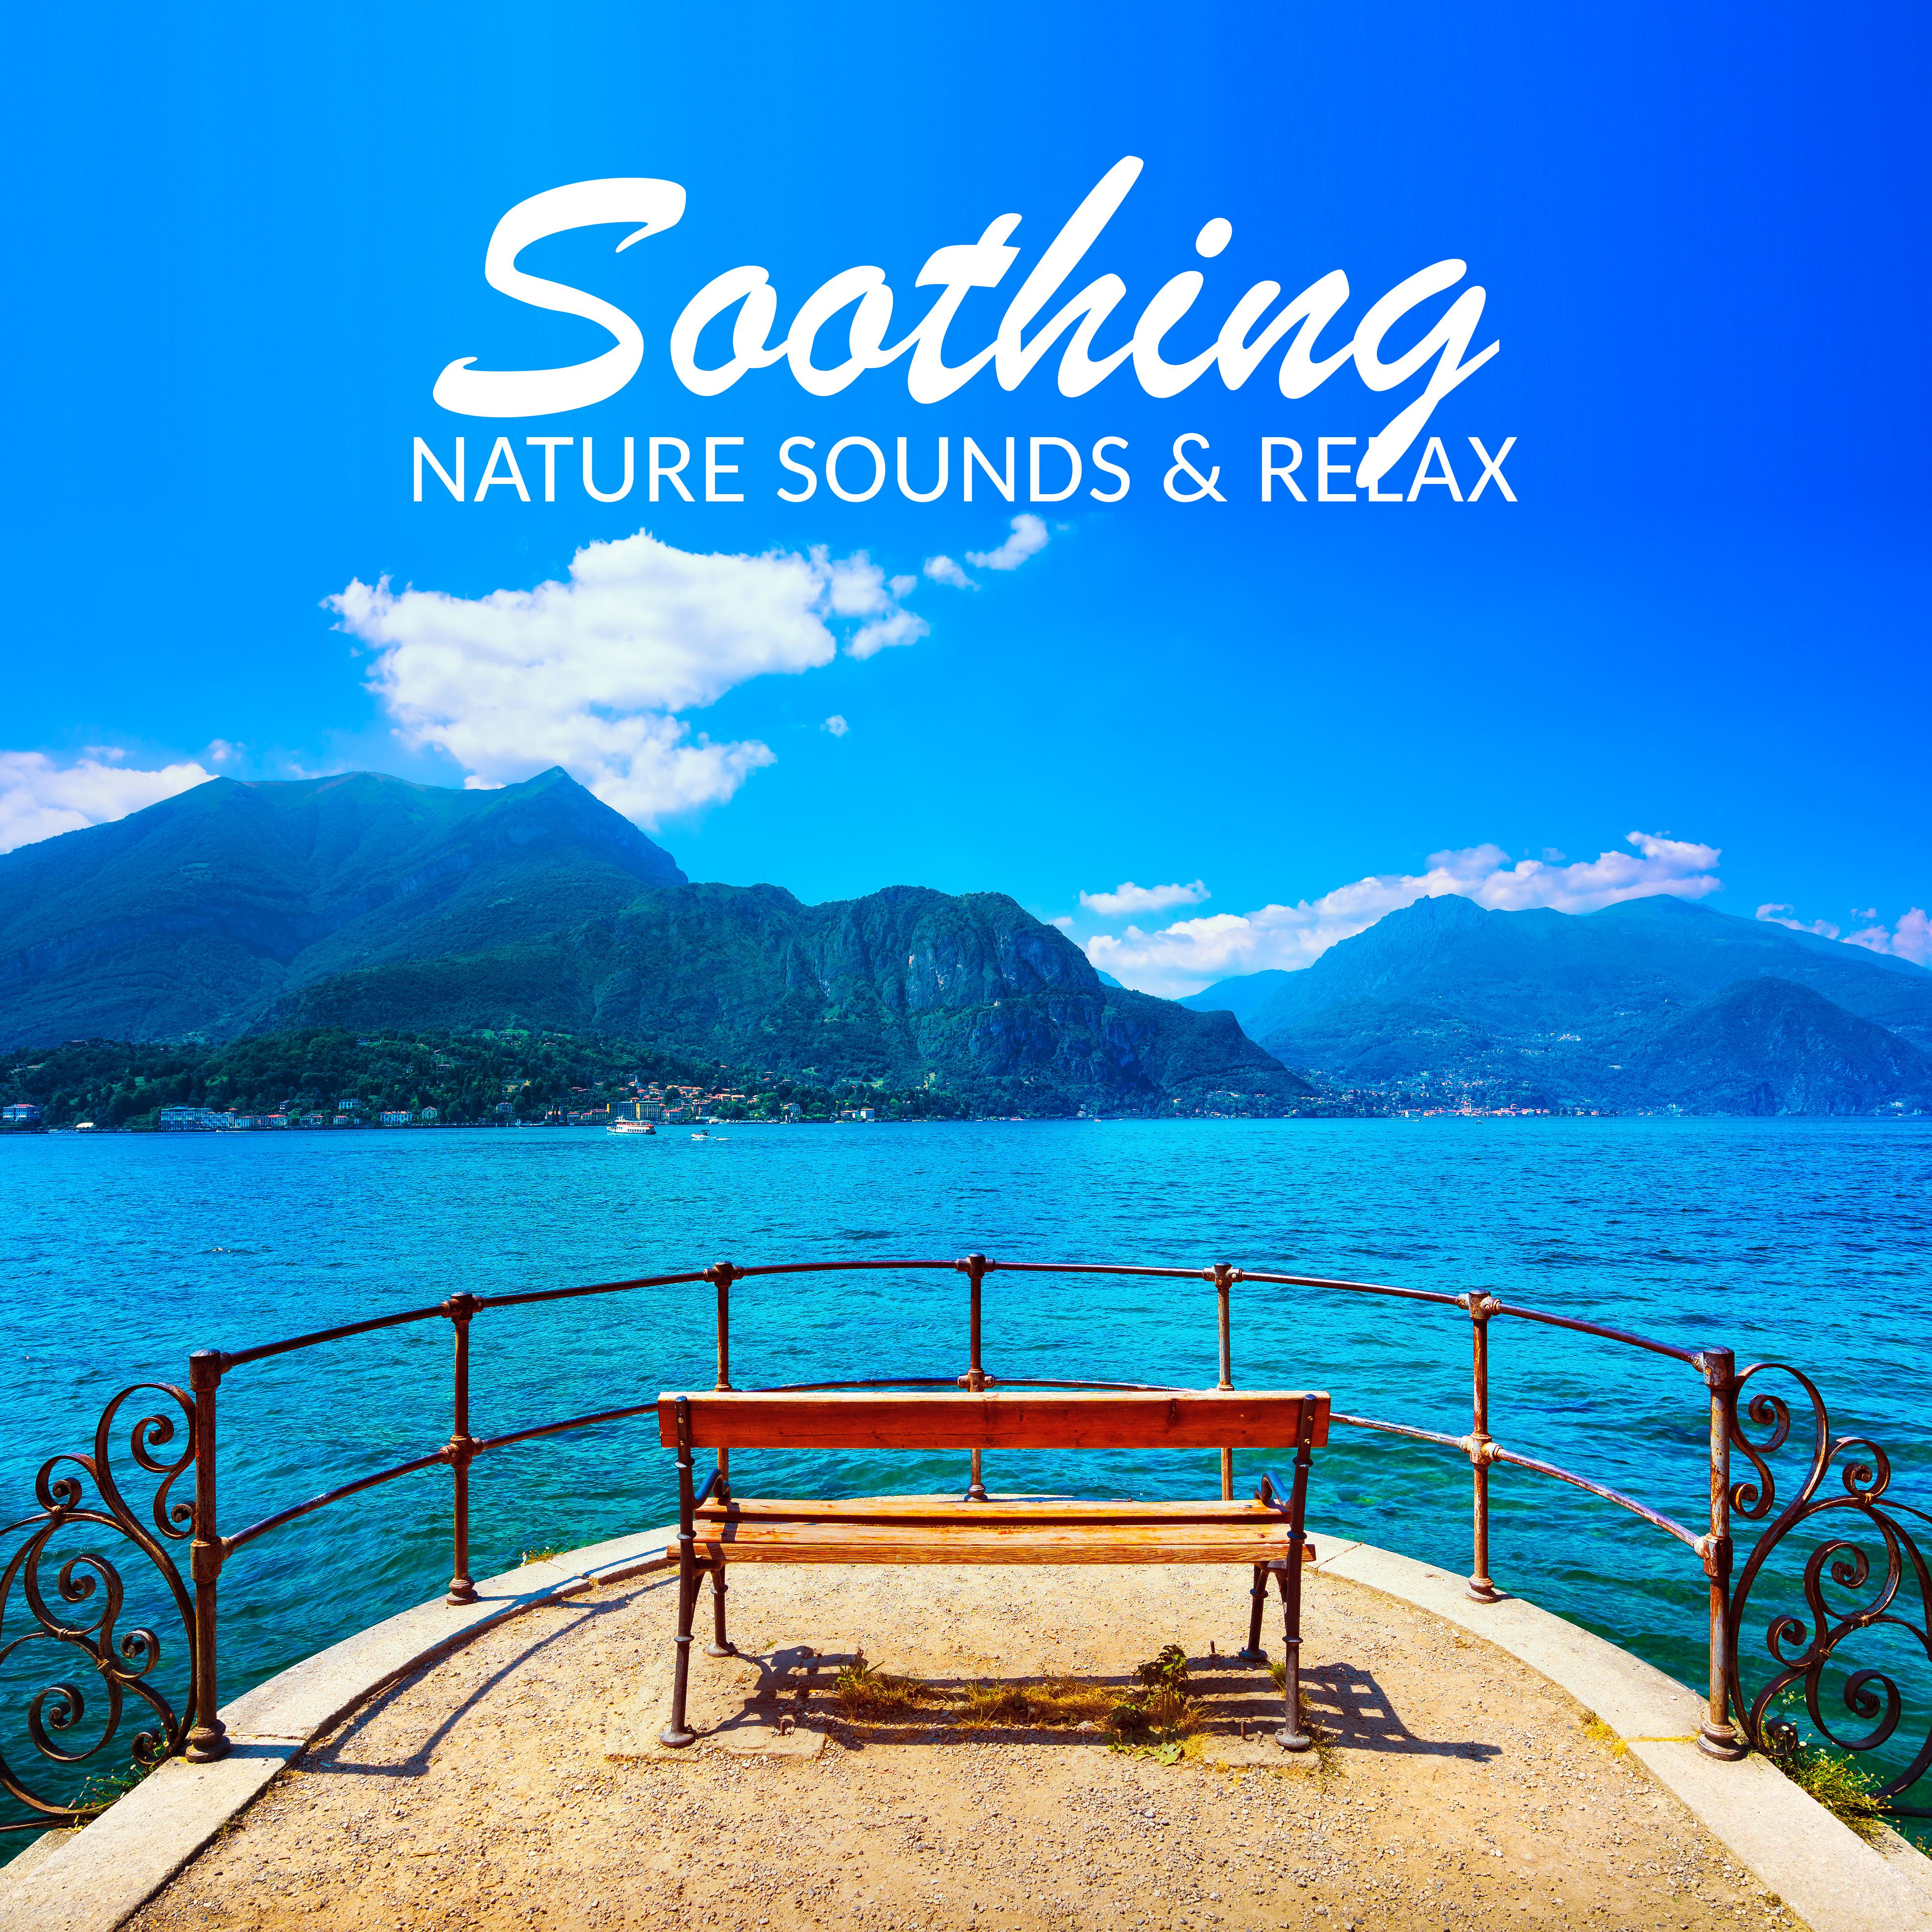 Soothing Nature Sounds & Relax